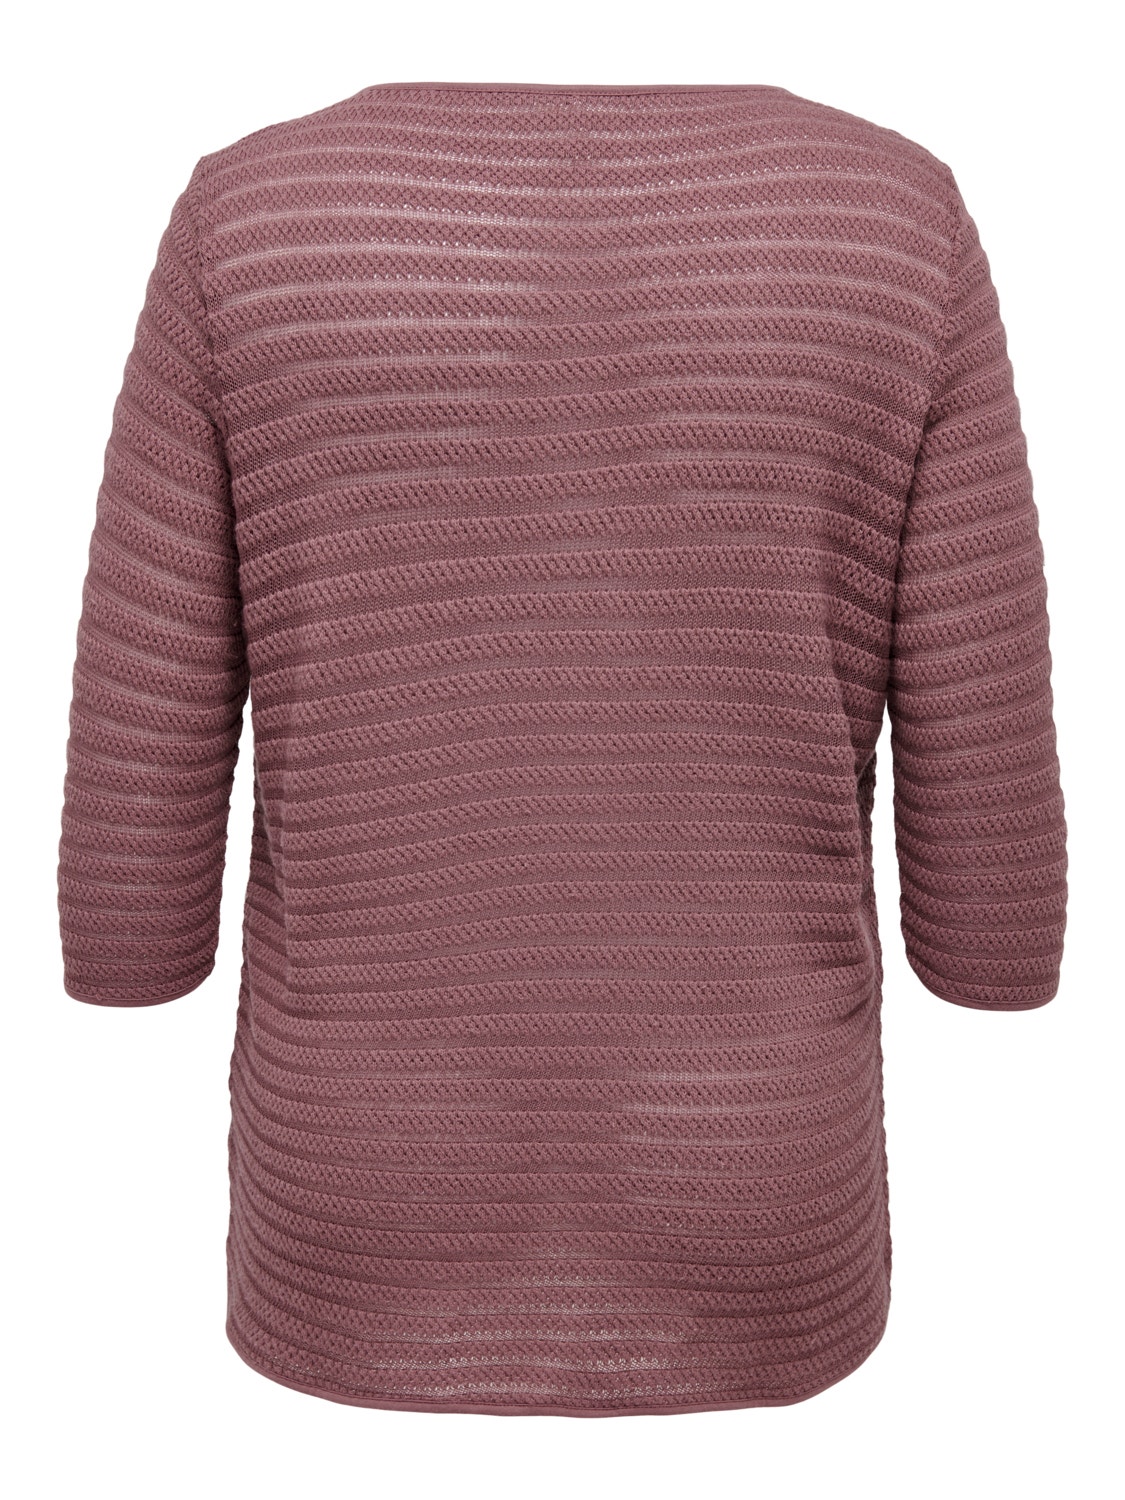 ONLY Curvy texture Knitted Cardigan -Rose Brown - 15176779